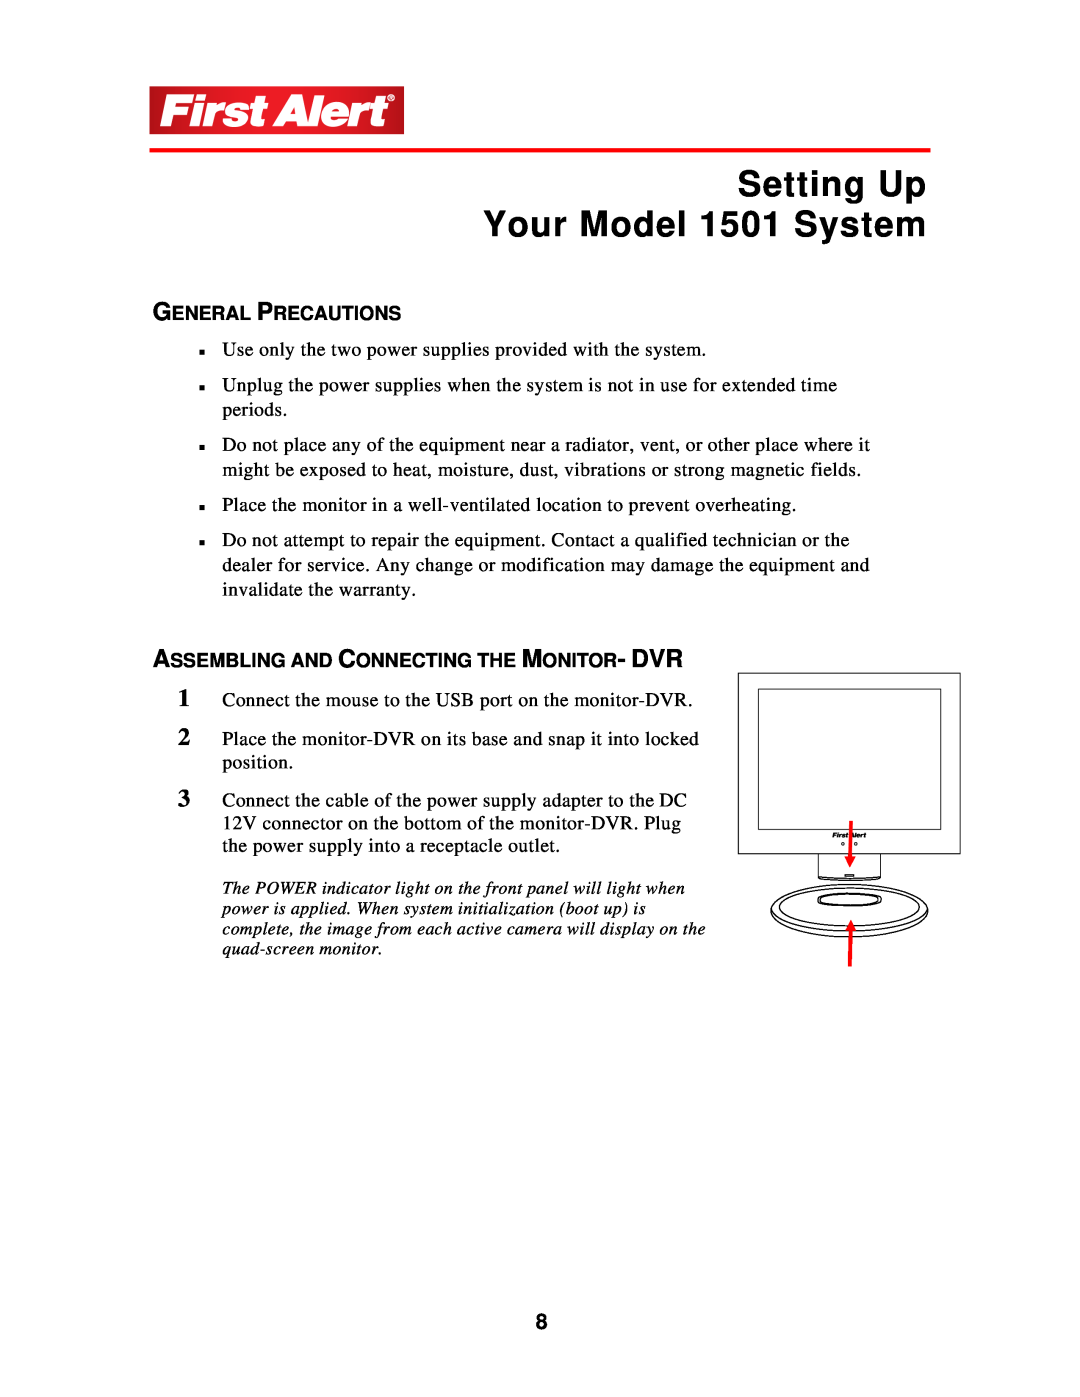 First Alert Setting Up Your Model 1501 System, General Precautions, Assembling And Connecting The Monitor- Dvr 